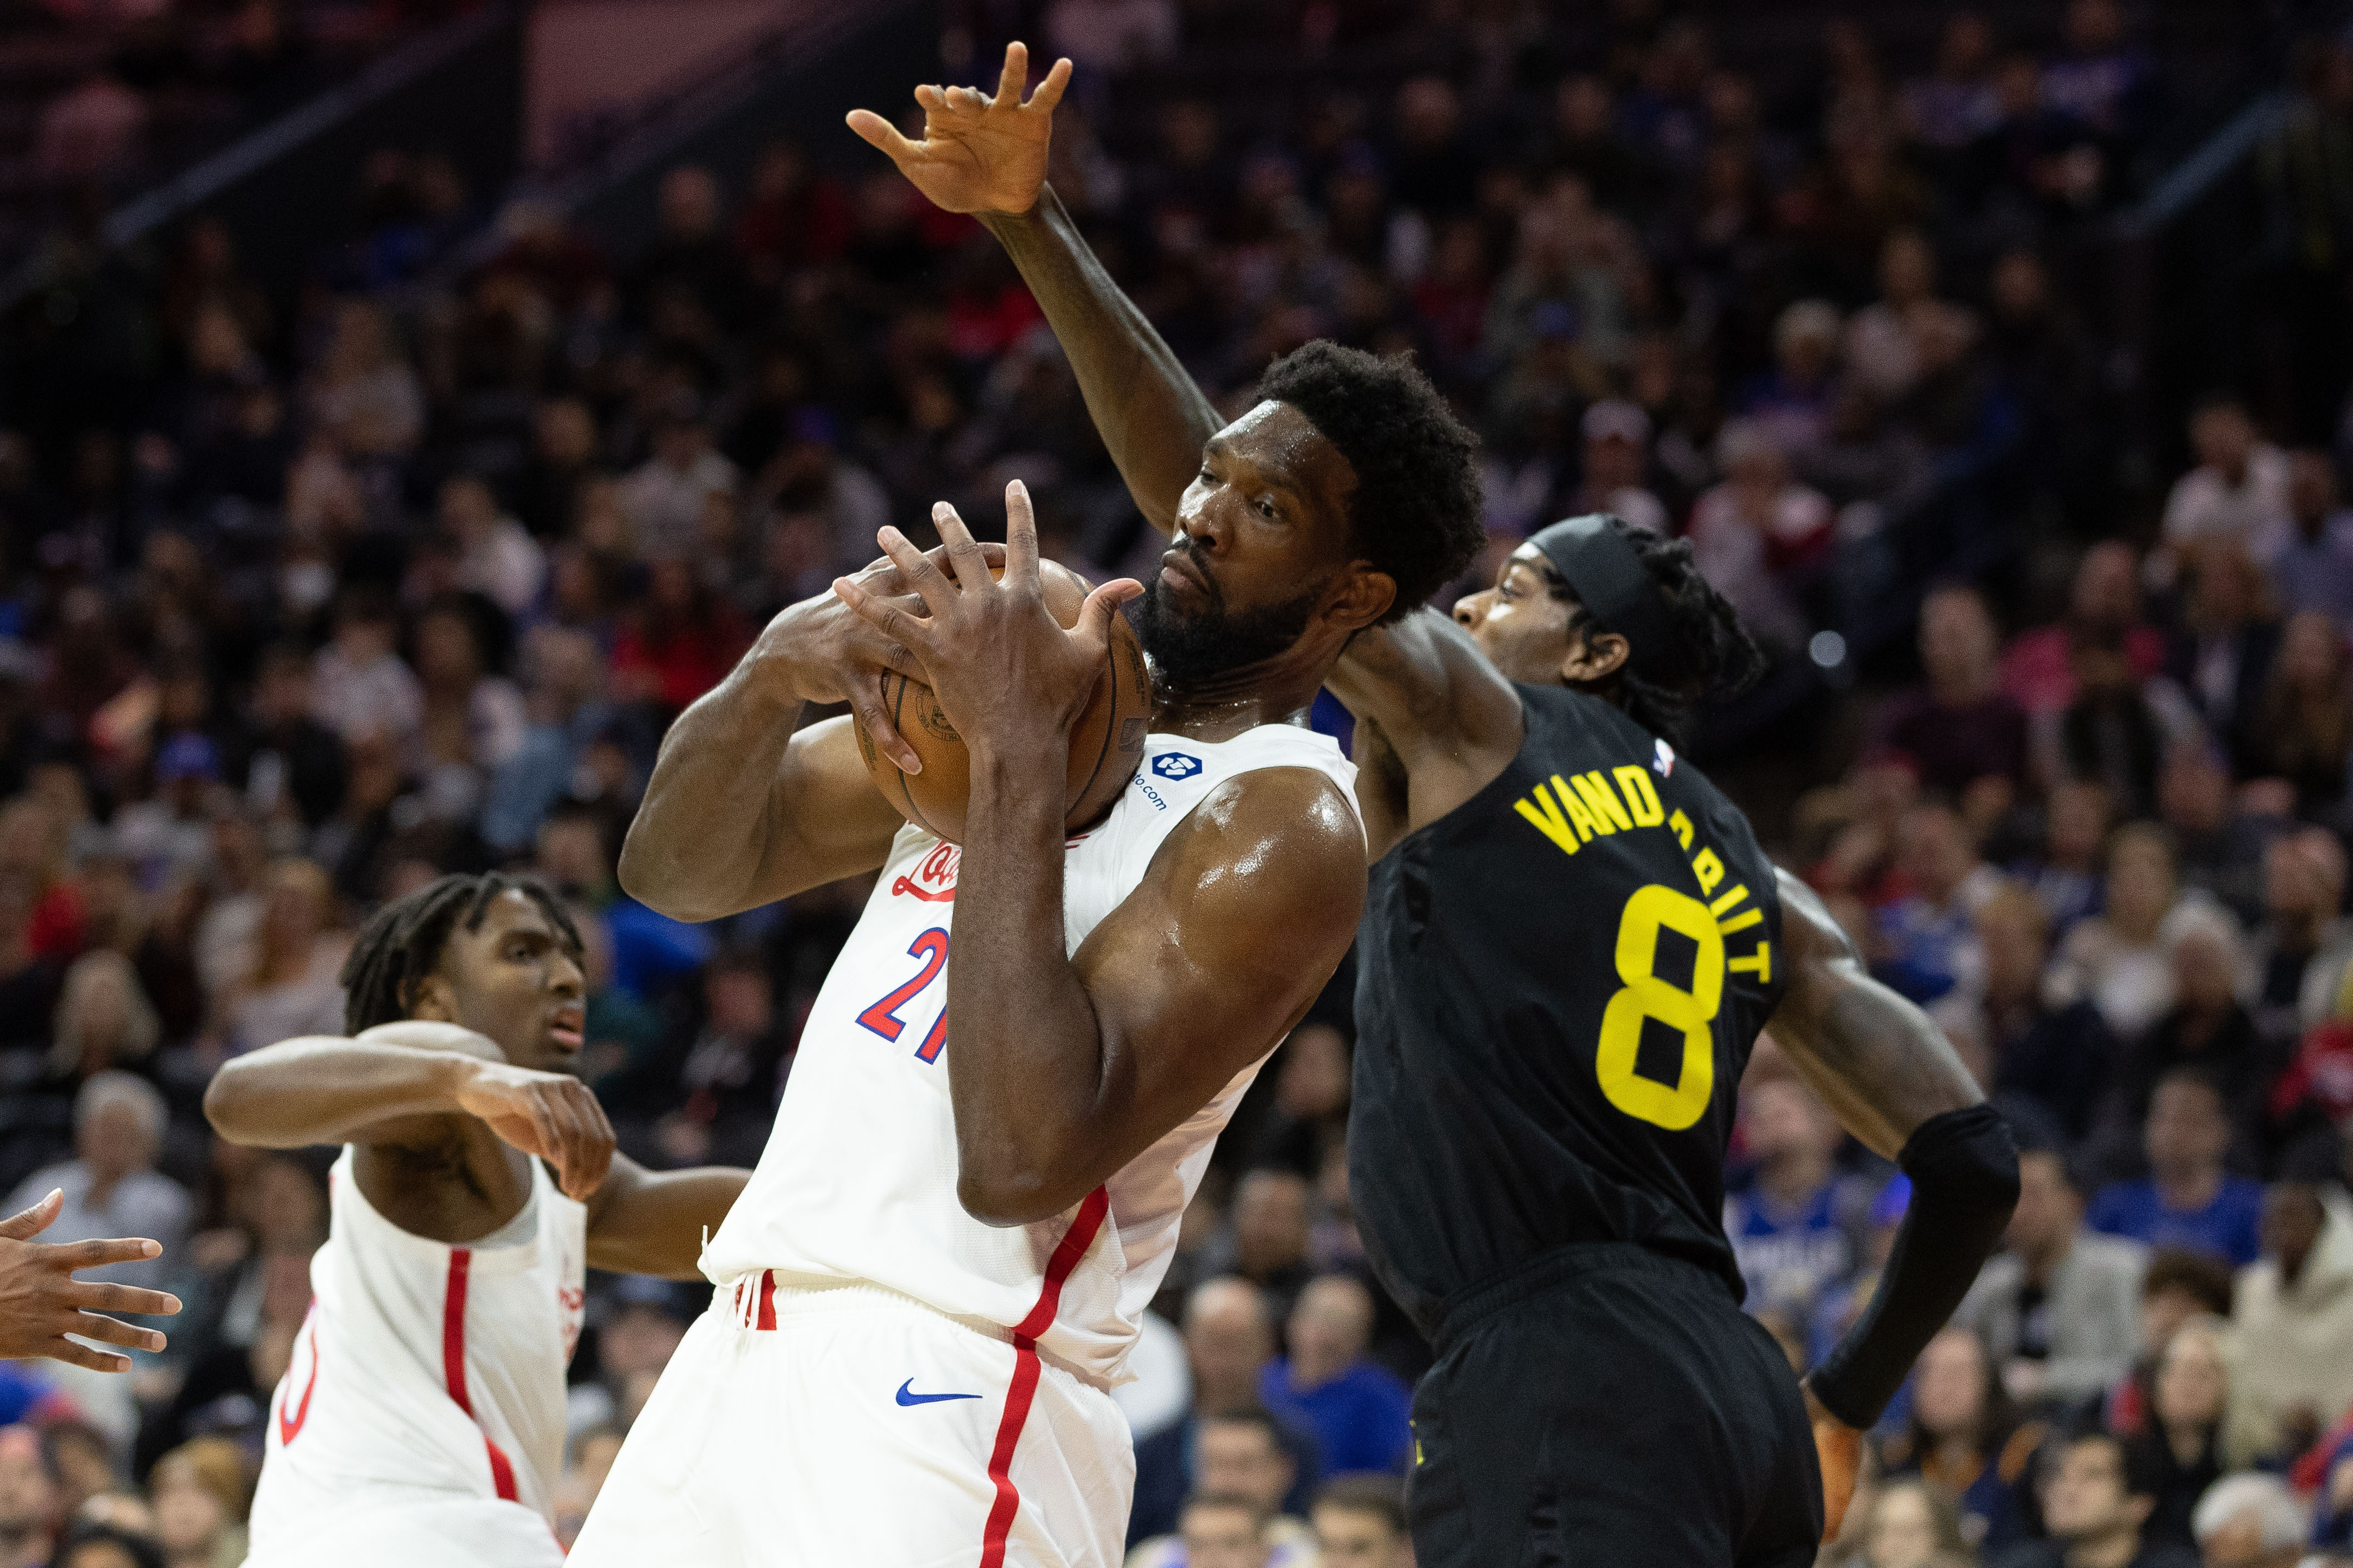 Sixers vs. Celtics Game 6 takeaways: Sixers crumbling, lacking trust, Joel  Embiid standing by